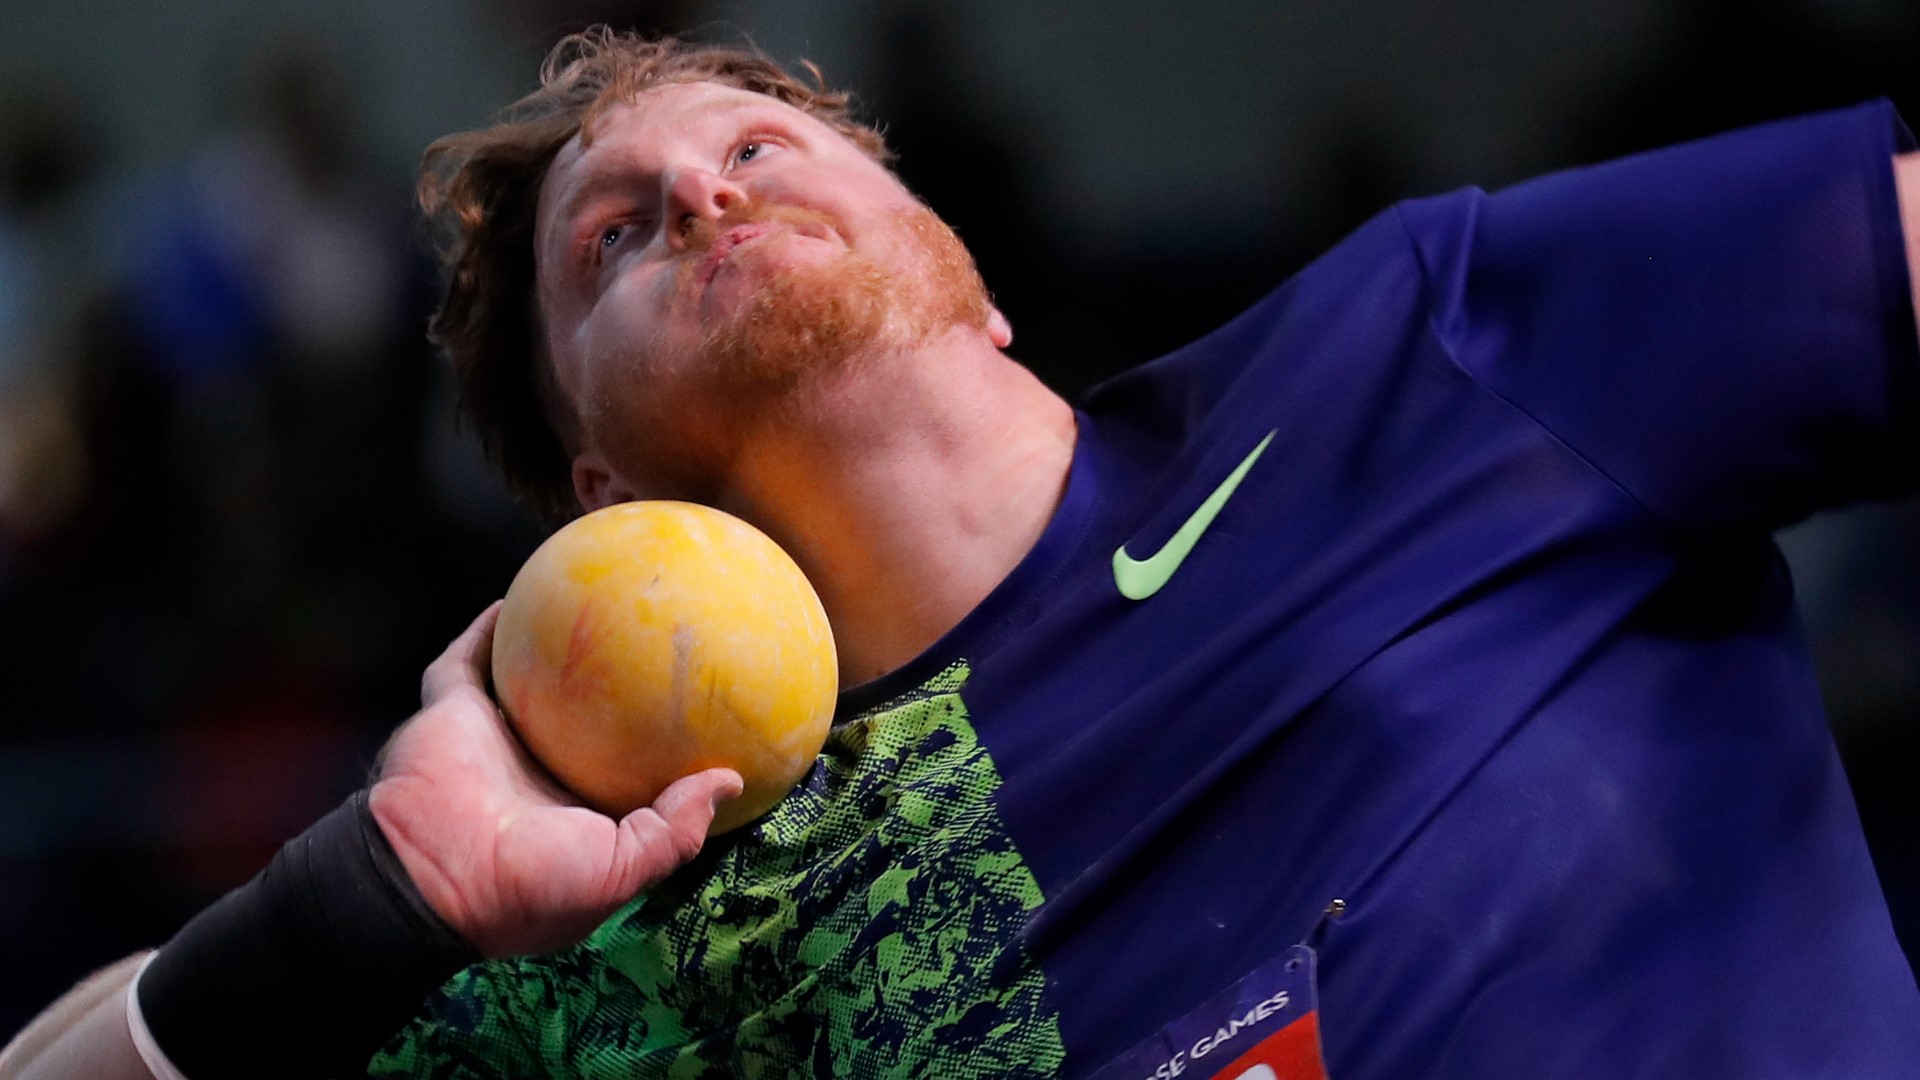 Crouser uses his large hands to throw a shot put, and to pursue tinier hobbies as well